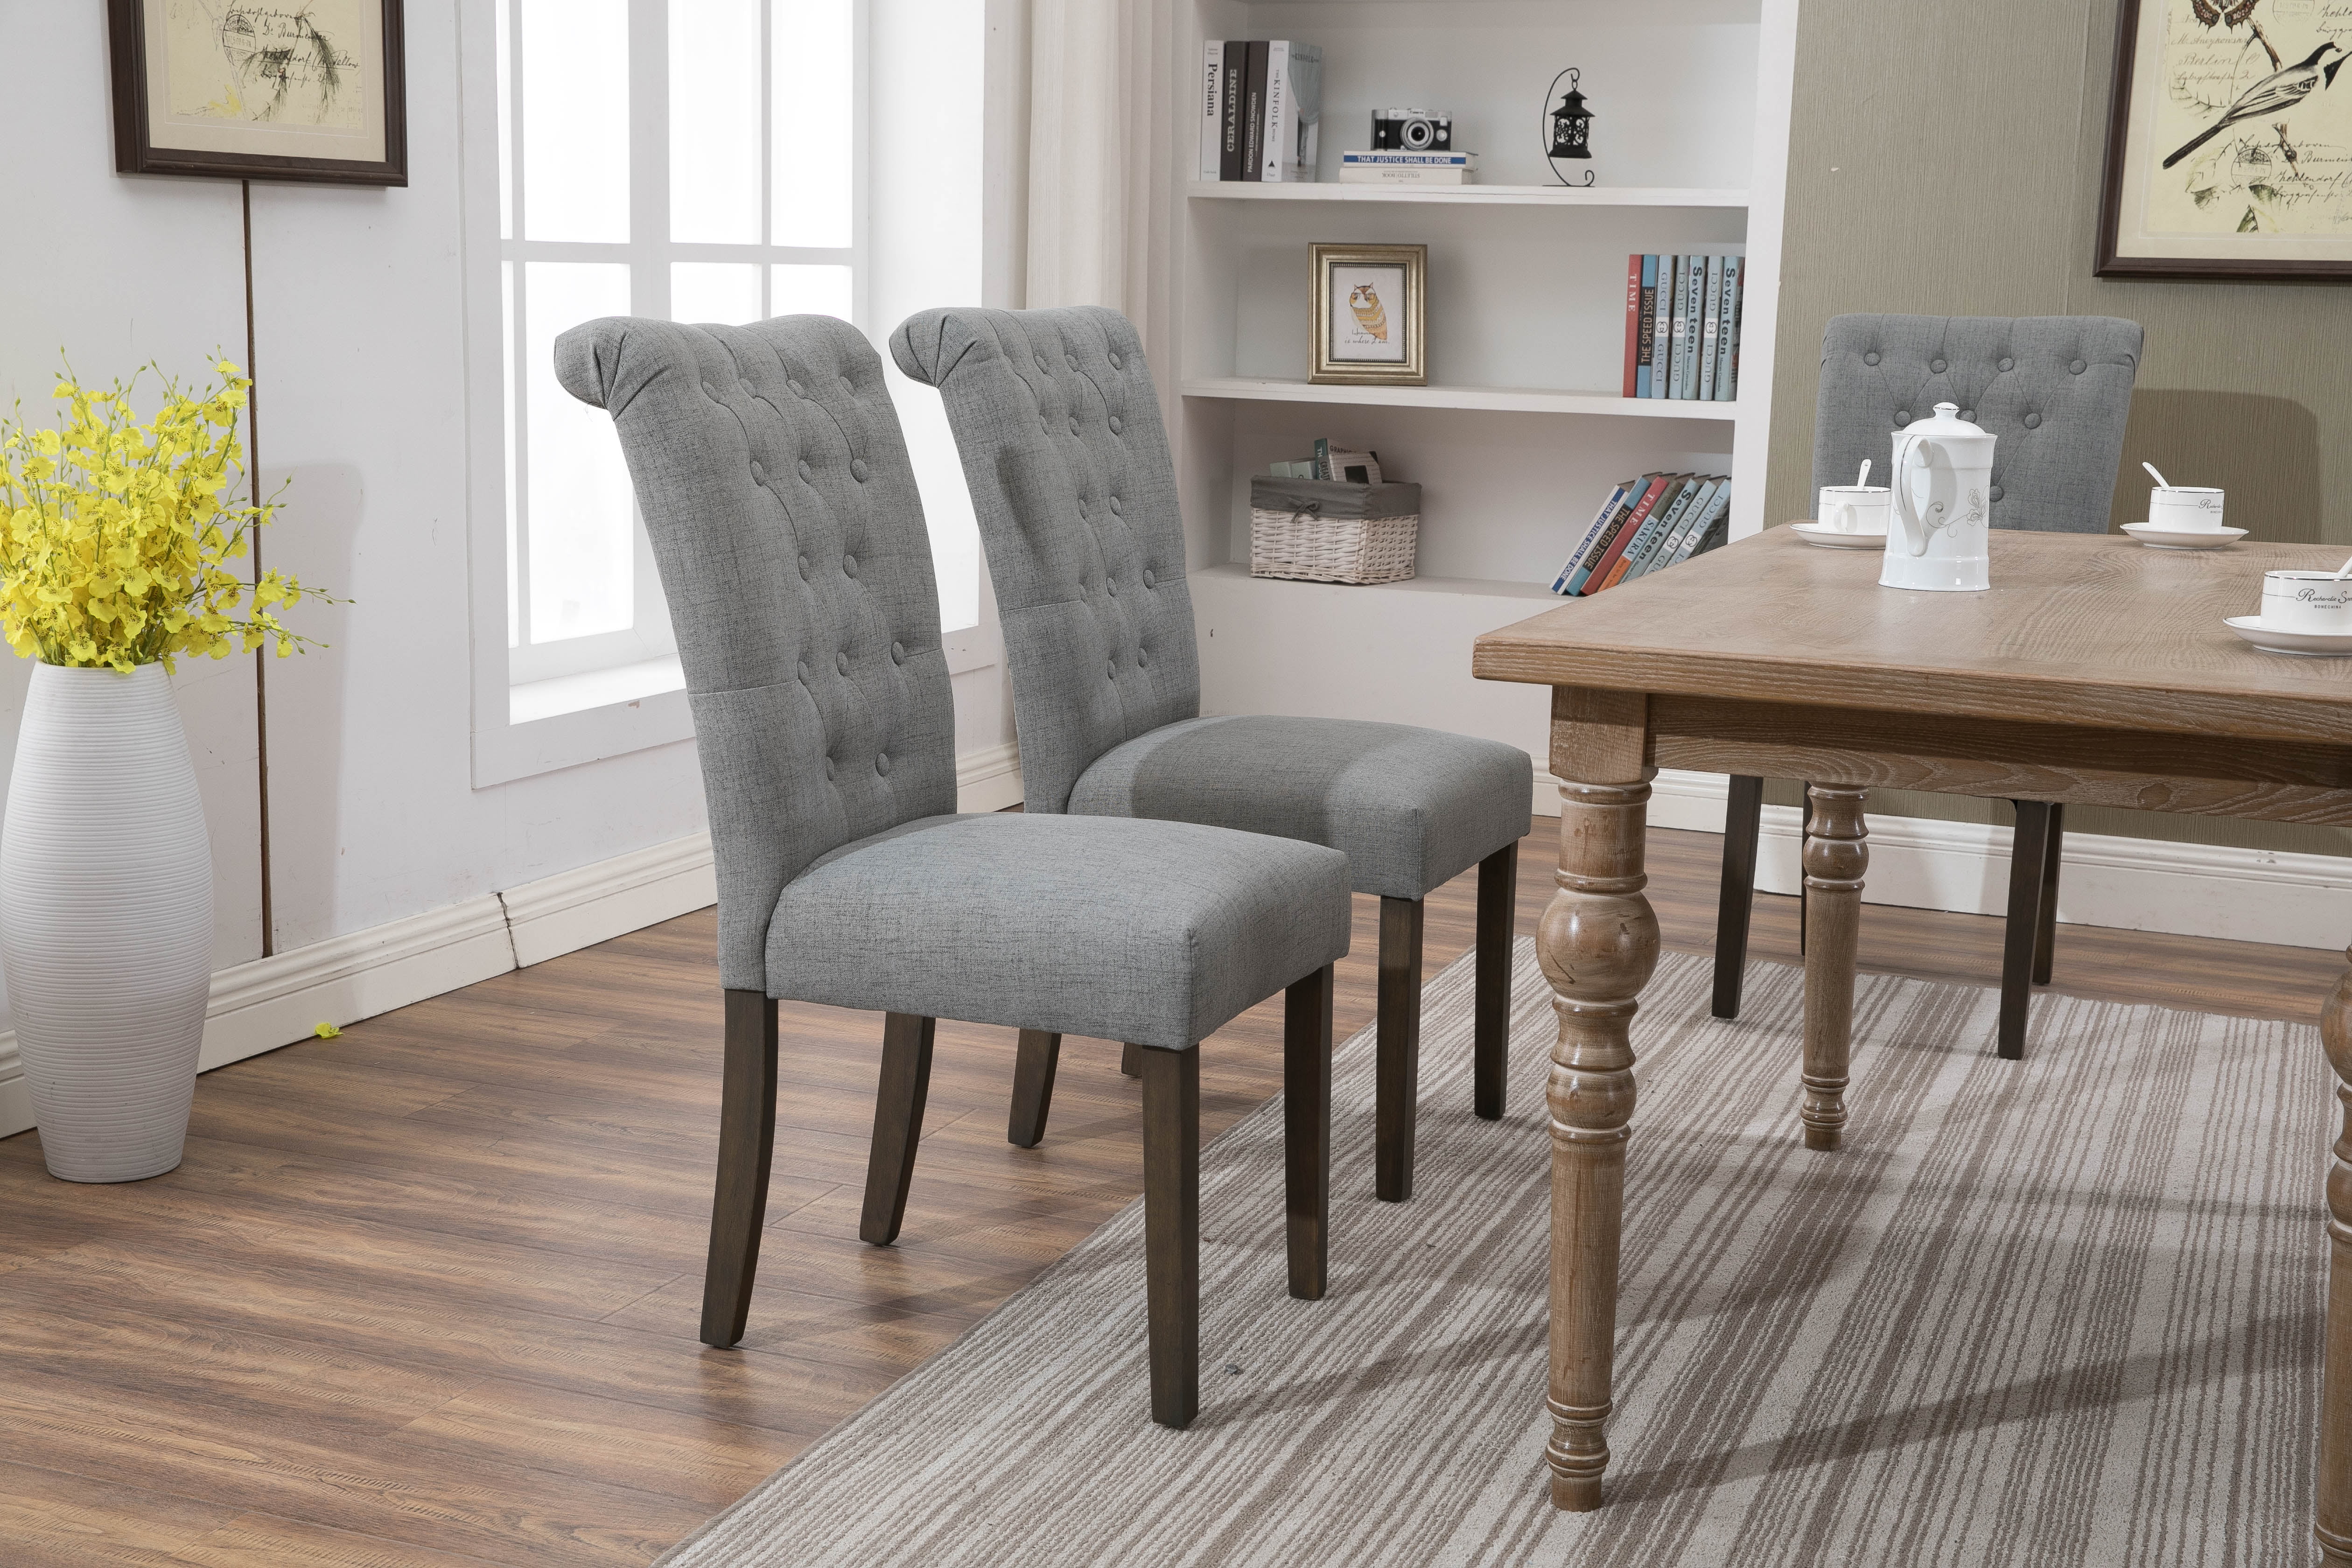 statement dining room chairs